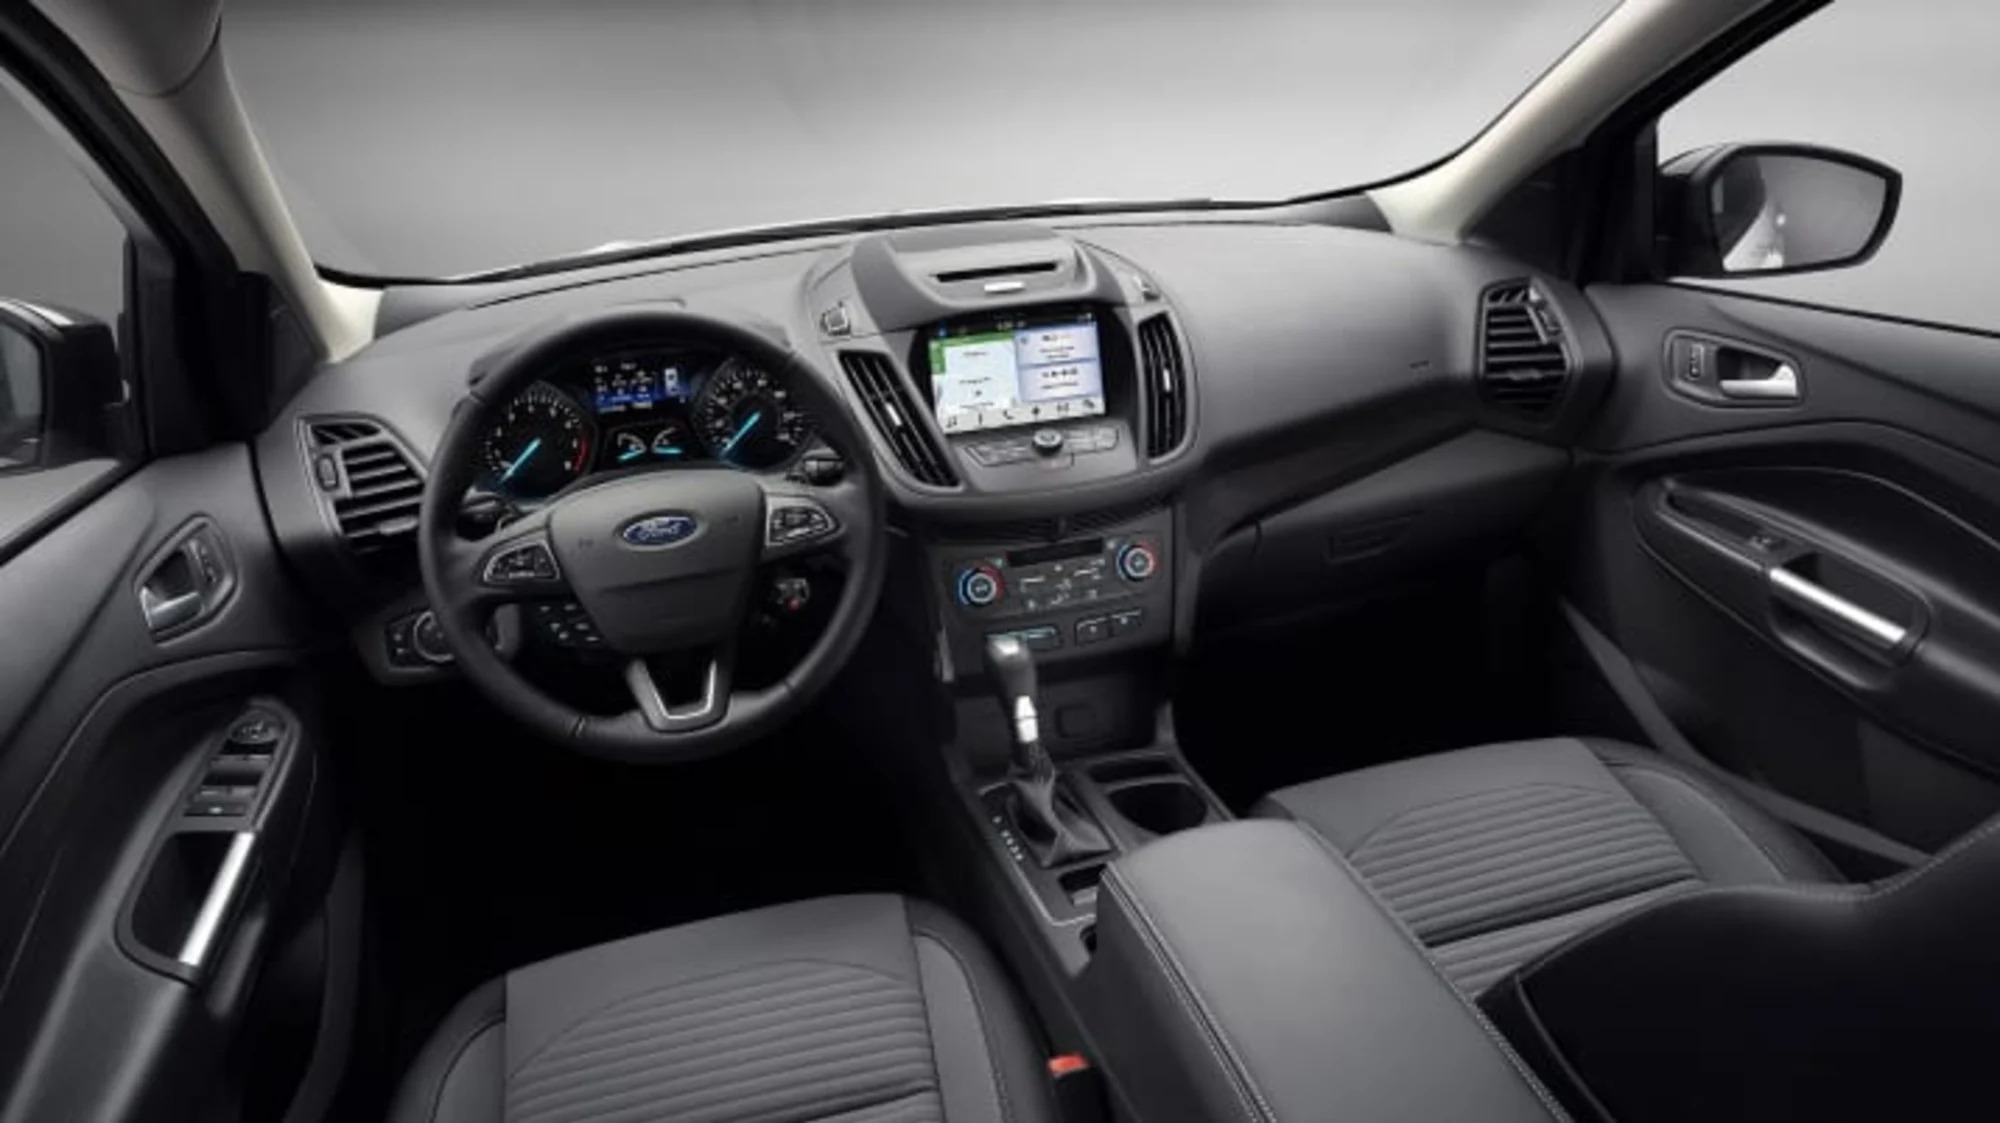 2017 Ford Escape Sport Appearance Package